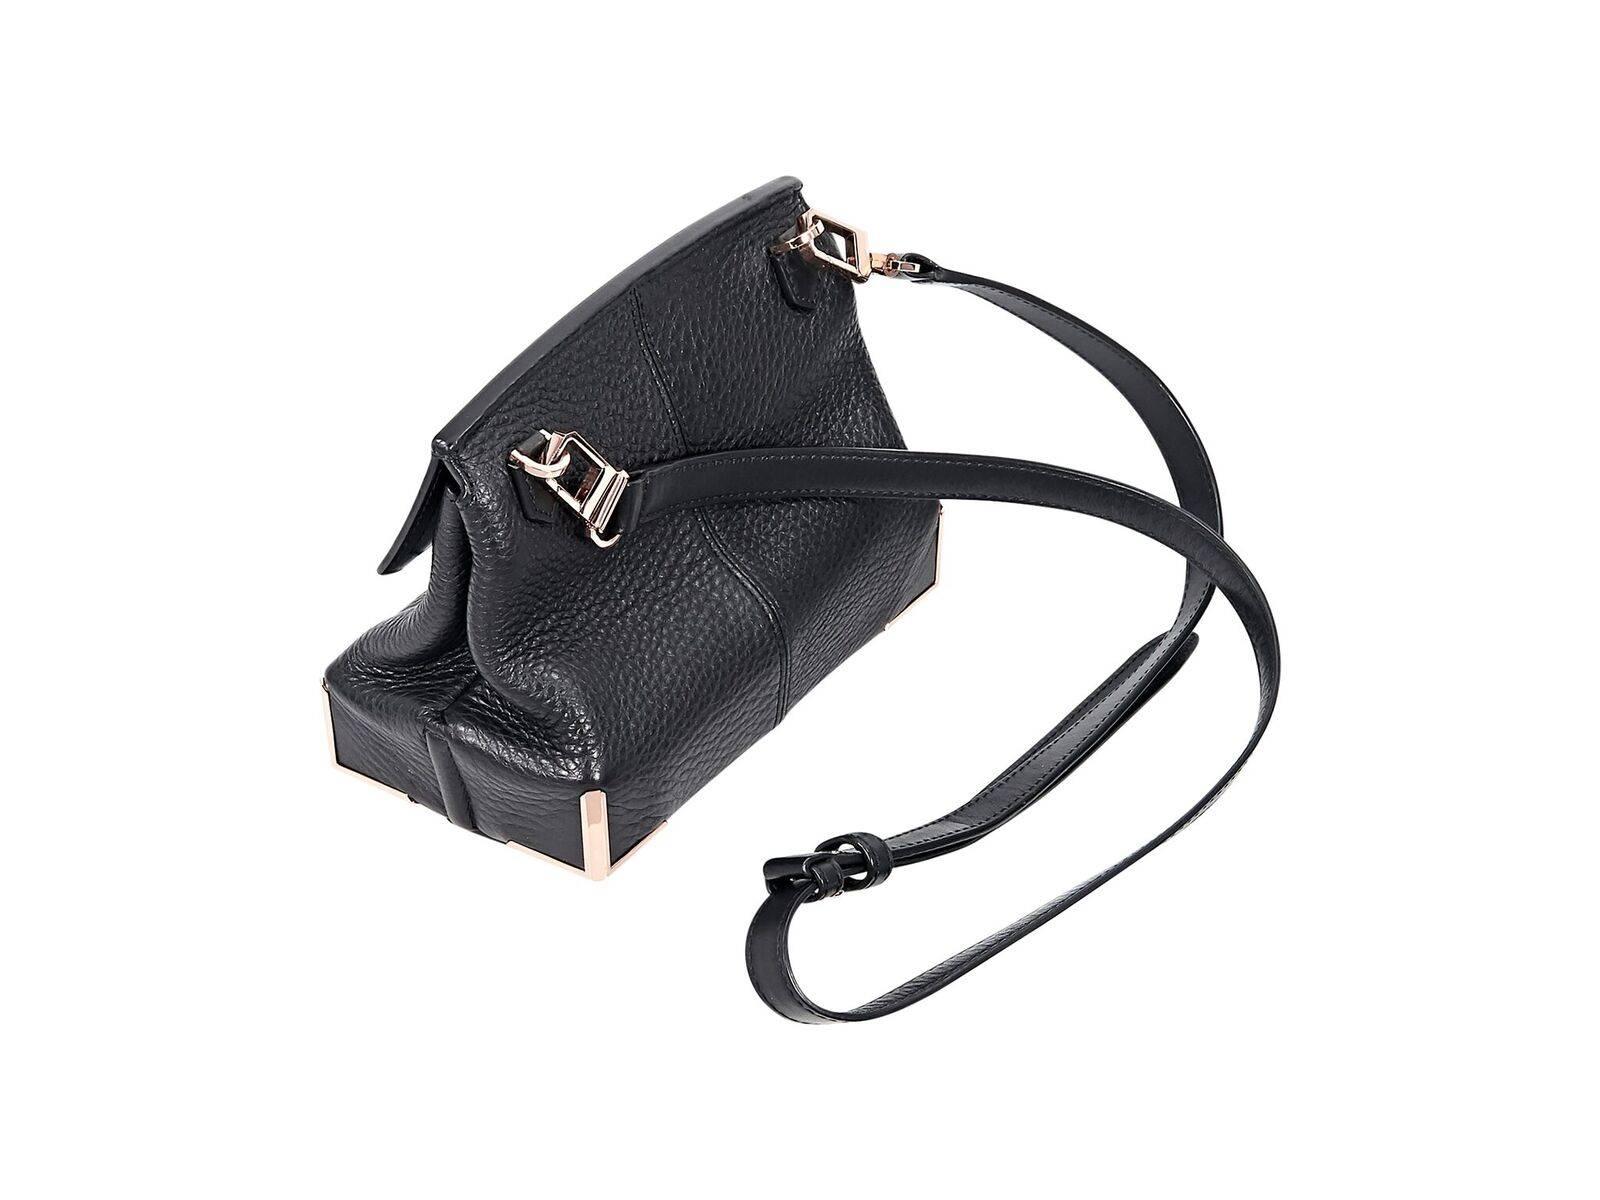 Product details:  Black leather Marion crossbody bag by Alexander Wang.  Detachable, adjustable crossbody strap.  Front flap with concealed closure.  Lined interior with inner zip pocket.  Flat bottom with protective metal corners.  Rose gold-tone